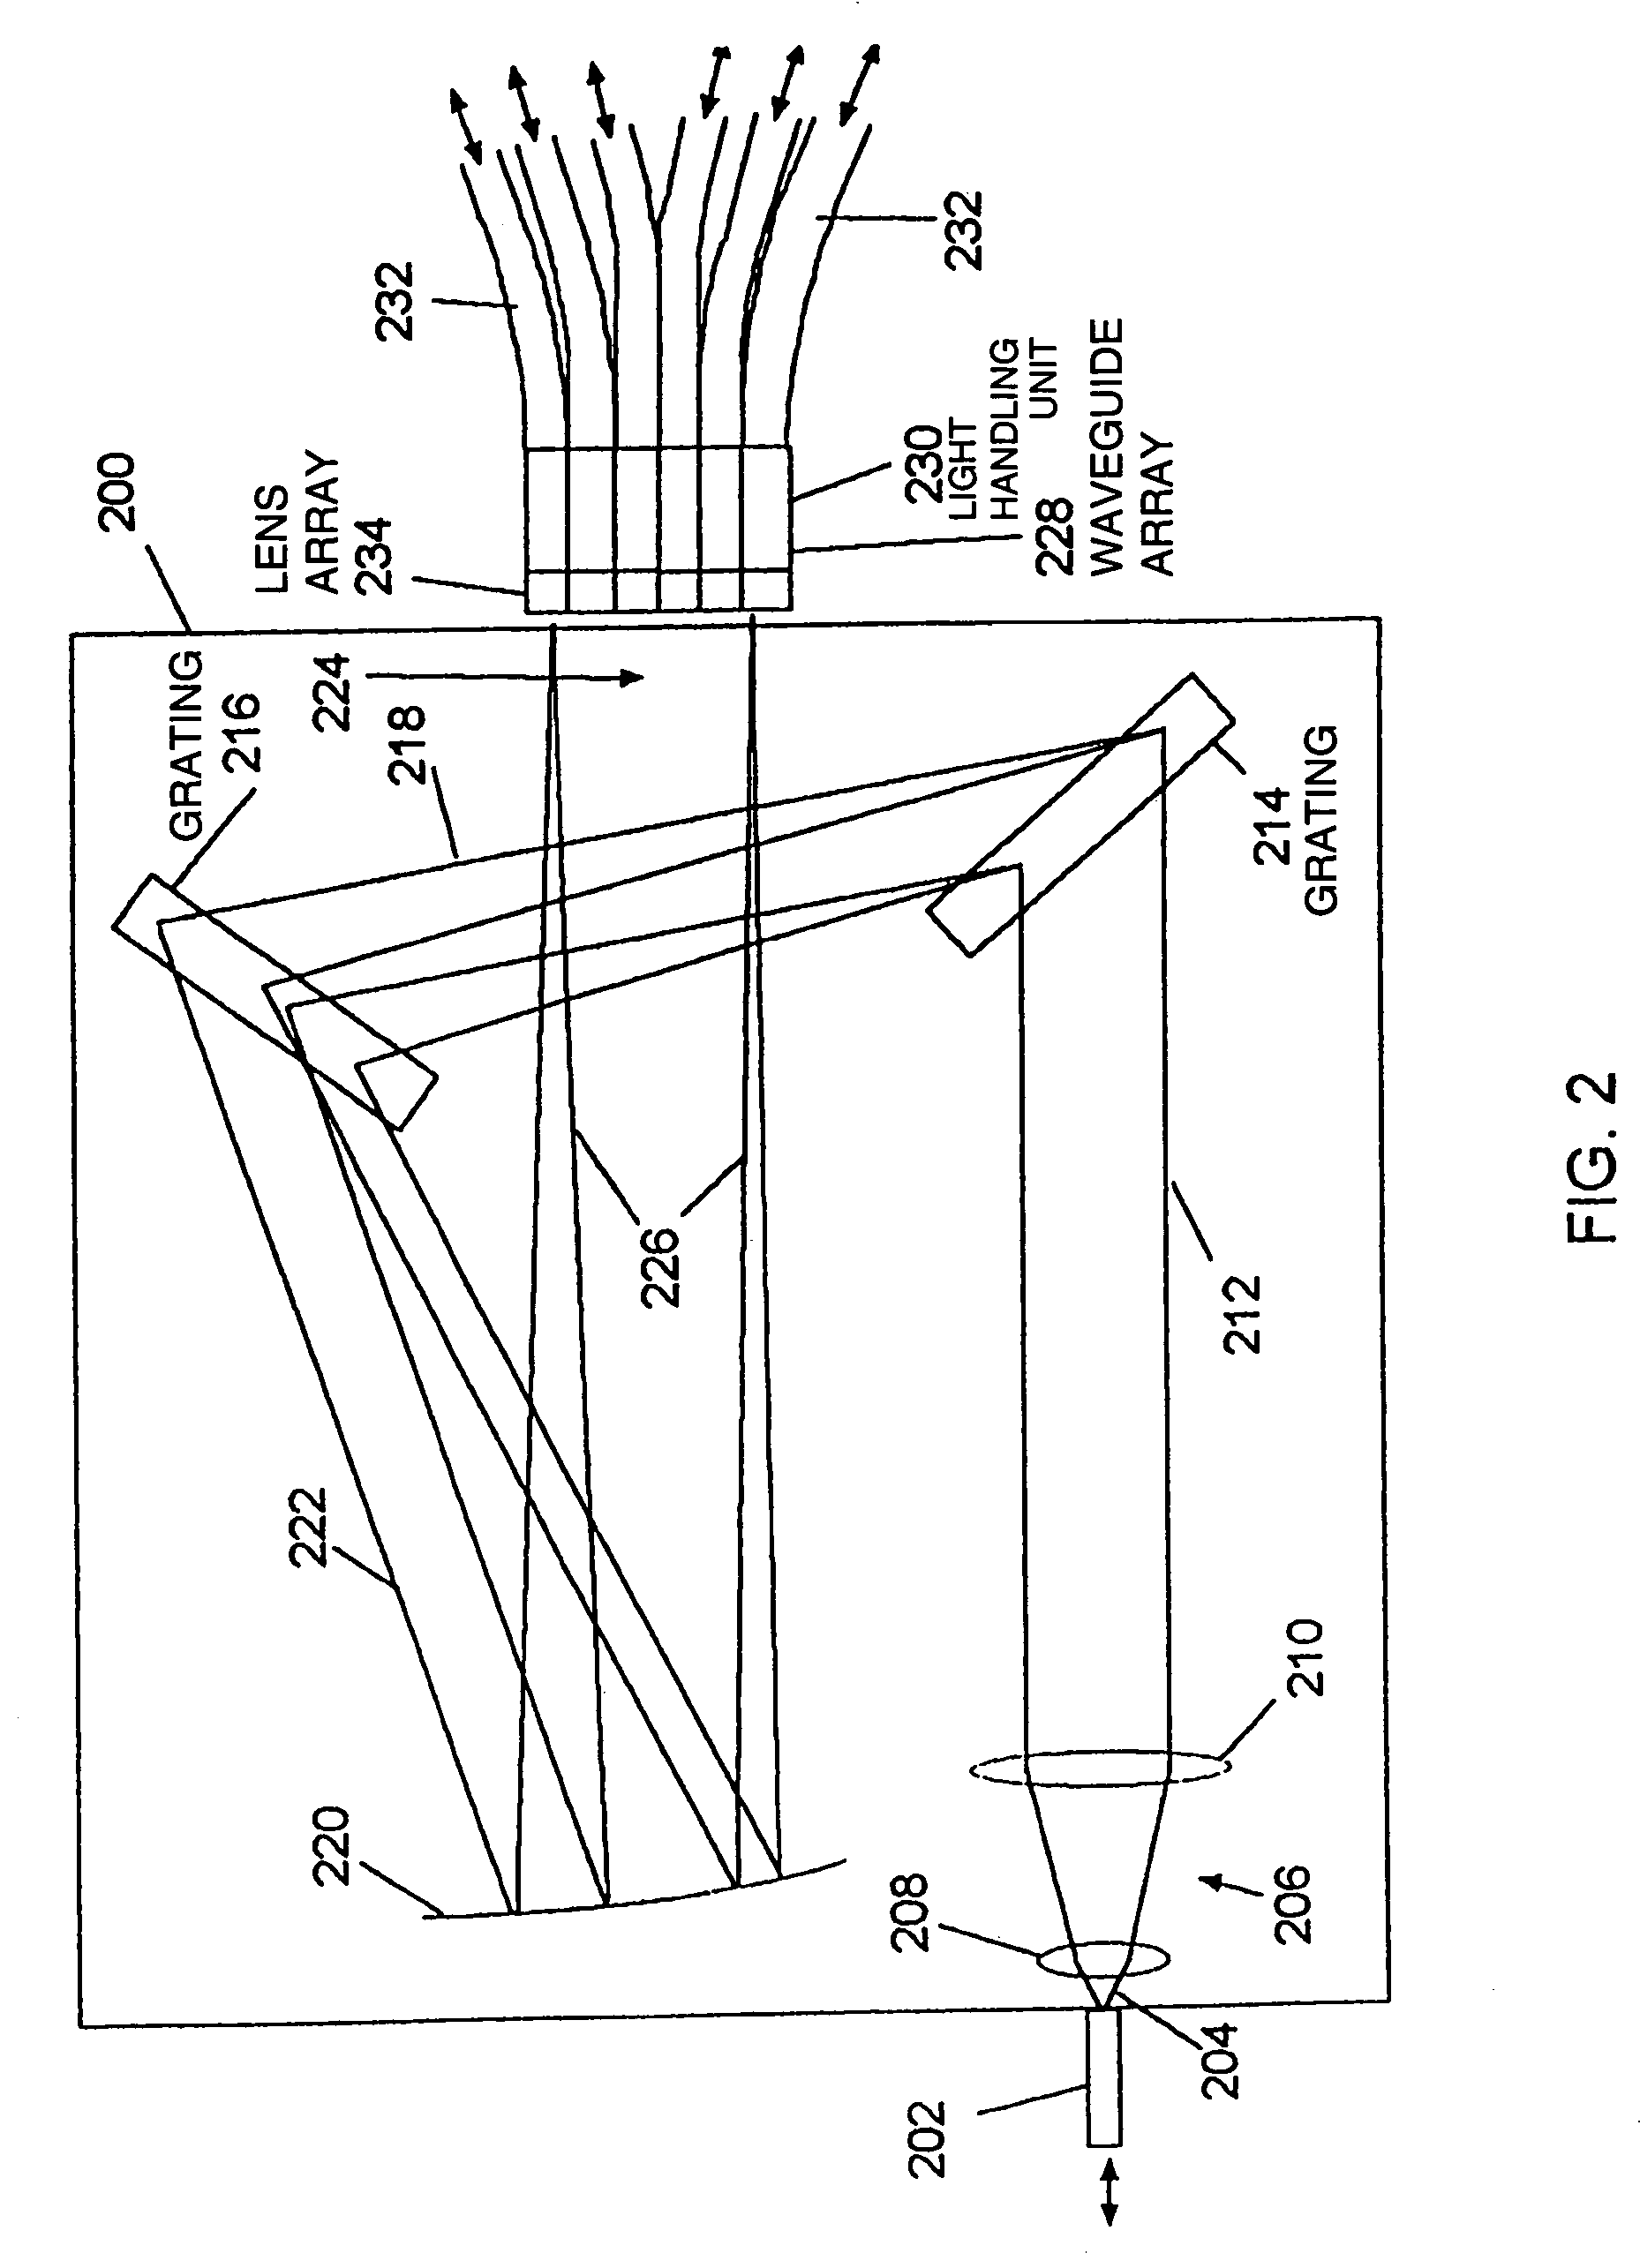 Wavelength division multiplexed device